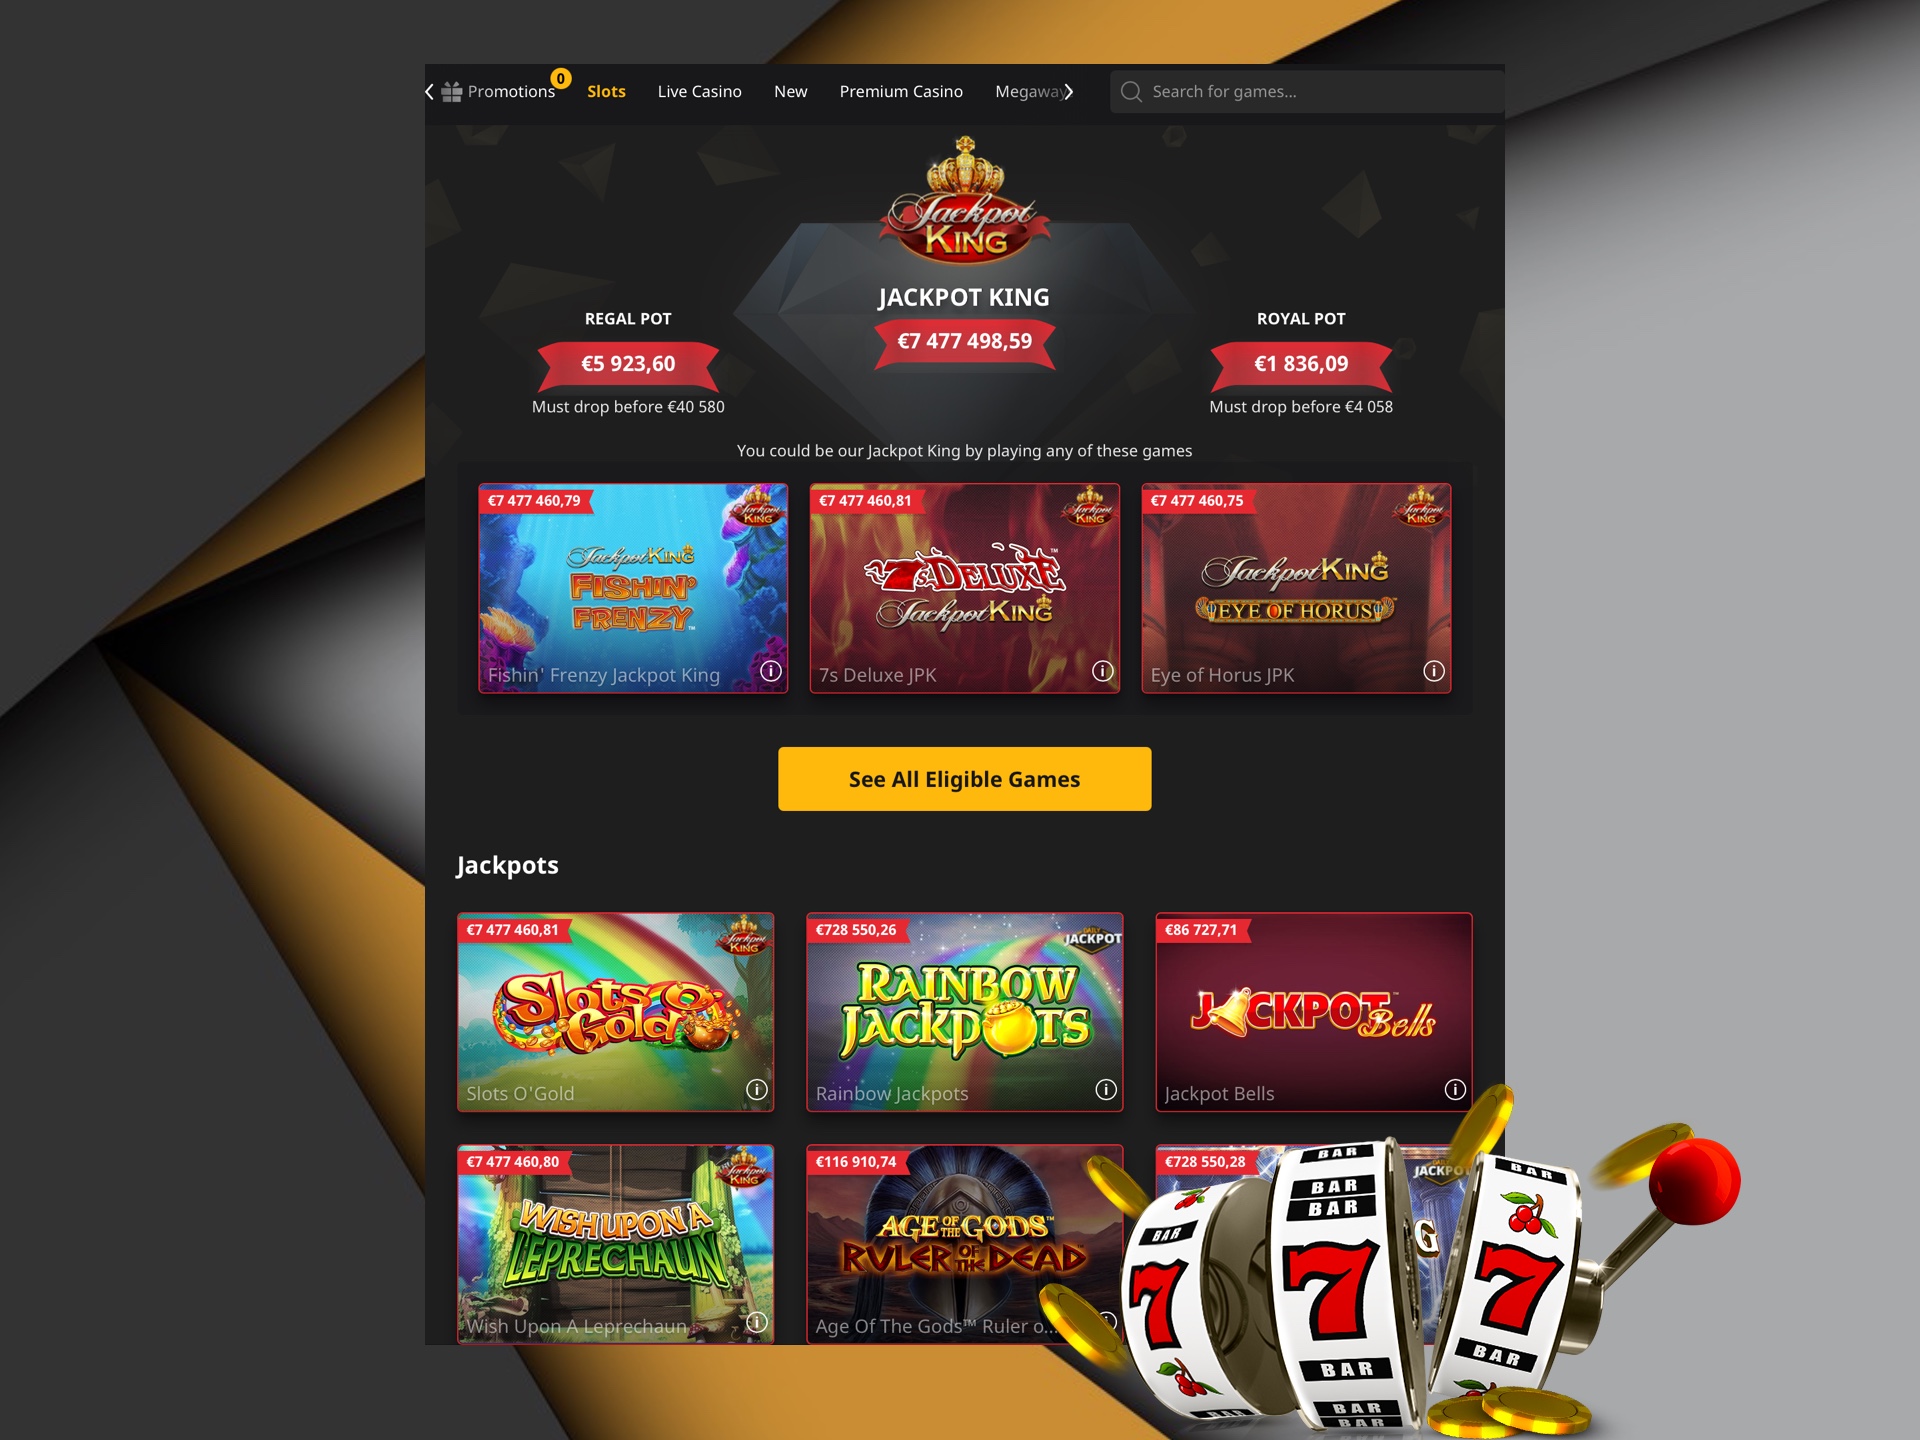 Register at Betfair Casino and try to win a jackpot in jackpot slots.